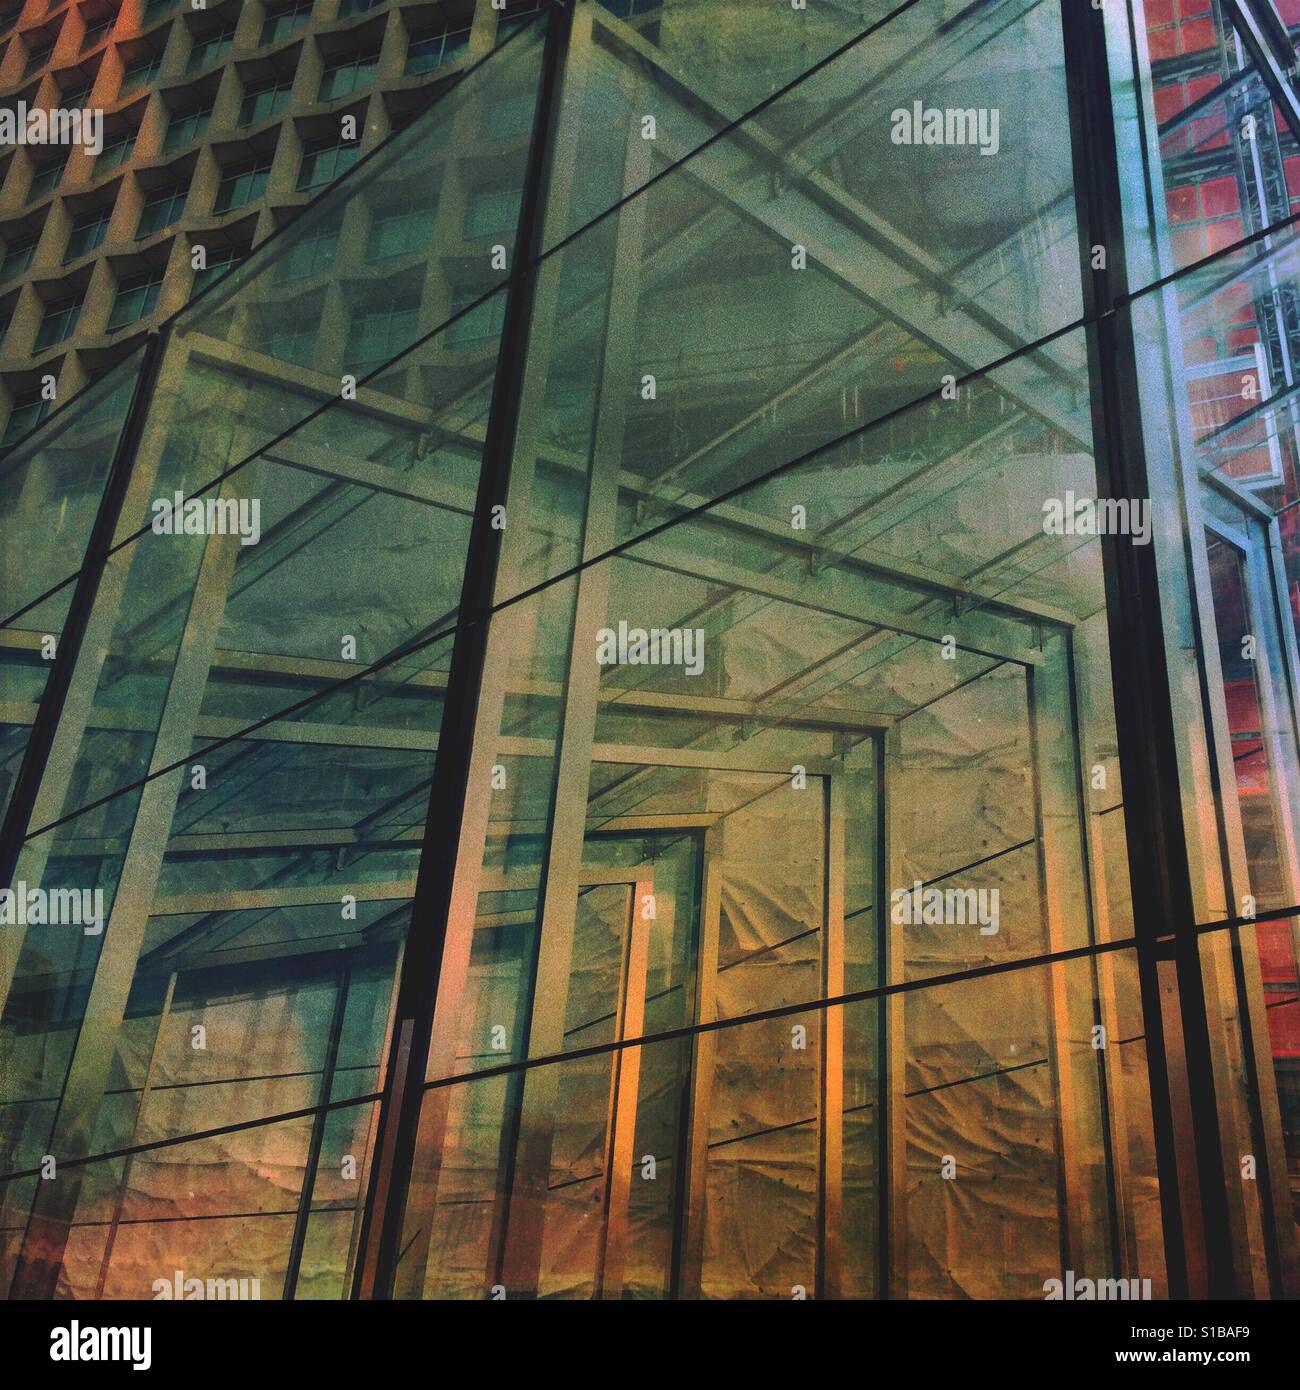 Concrete and glass cubism style architecture detail Stock Photo